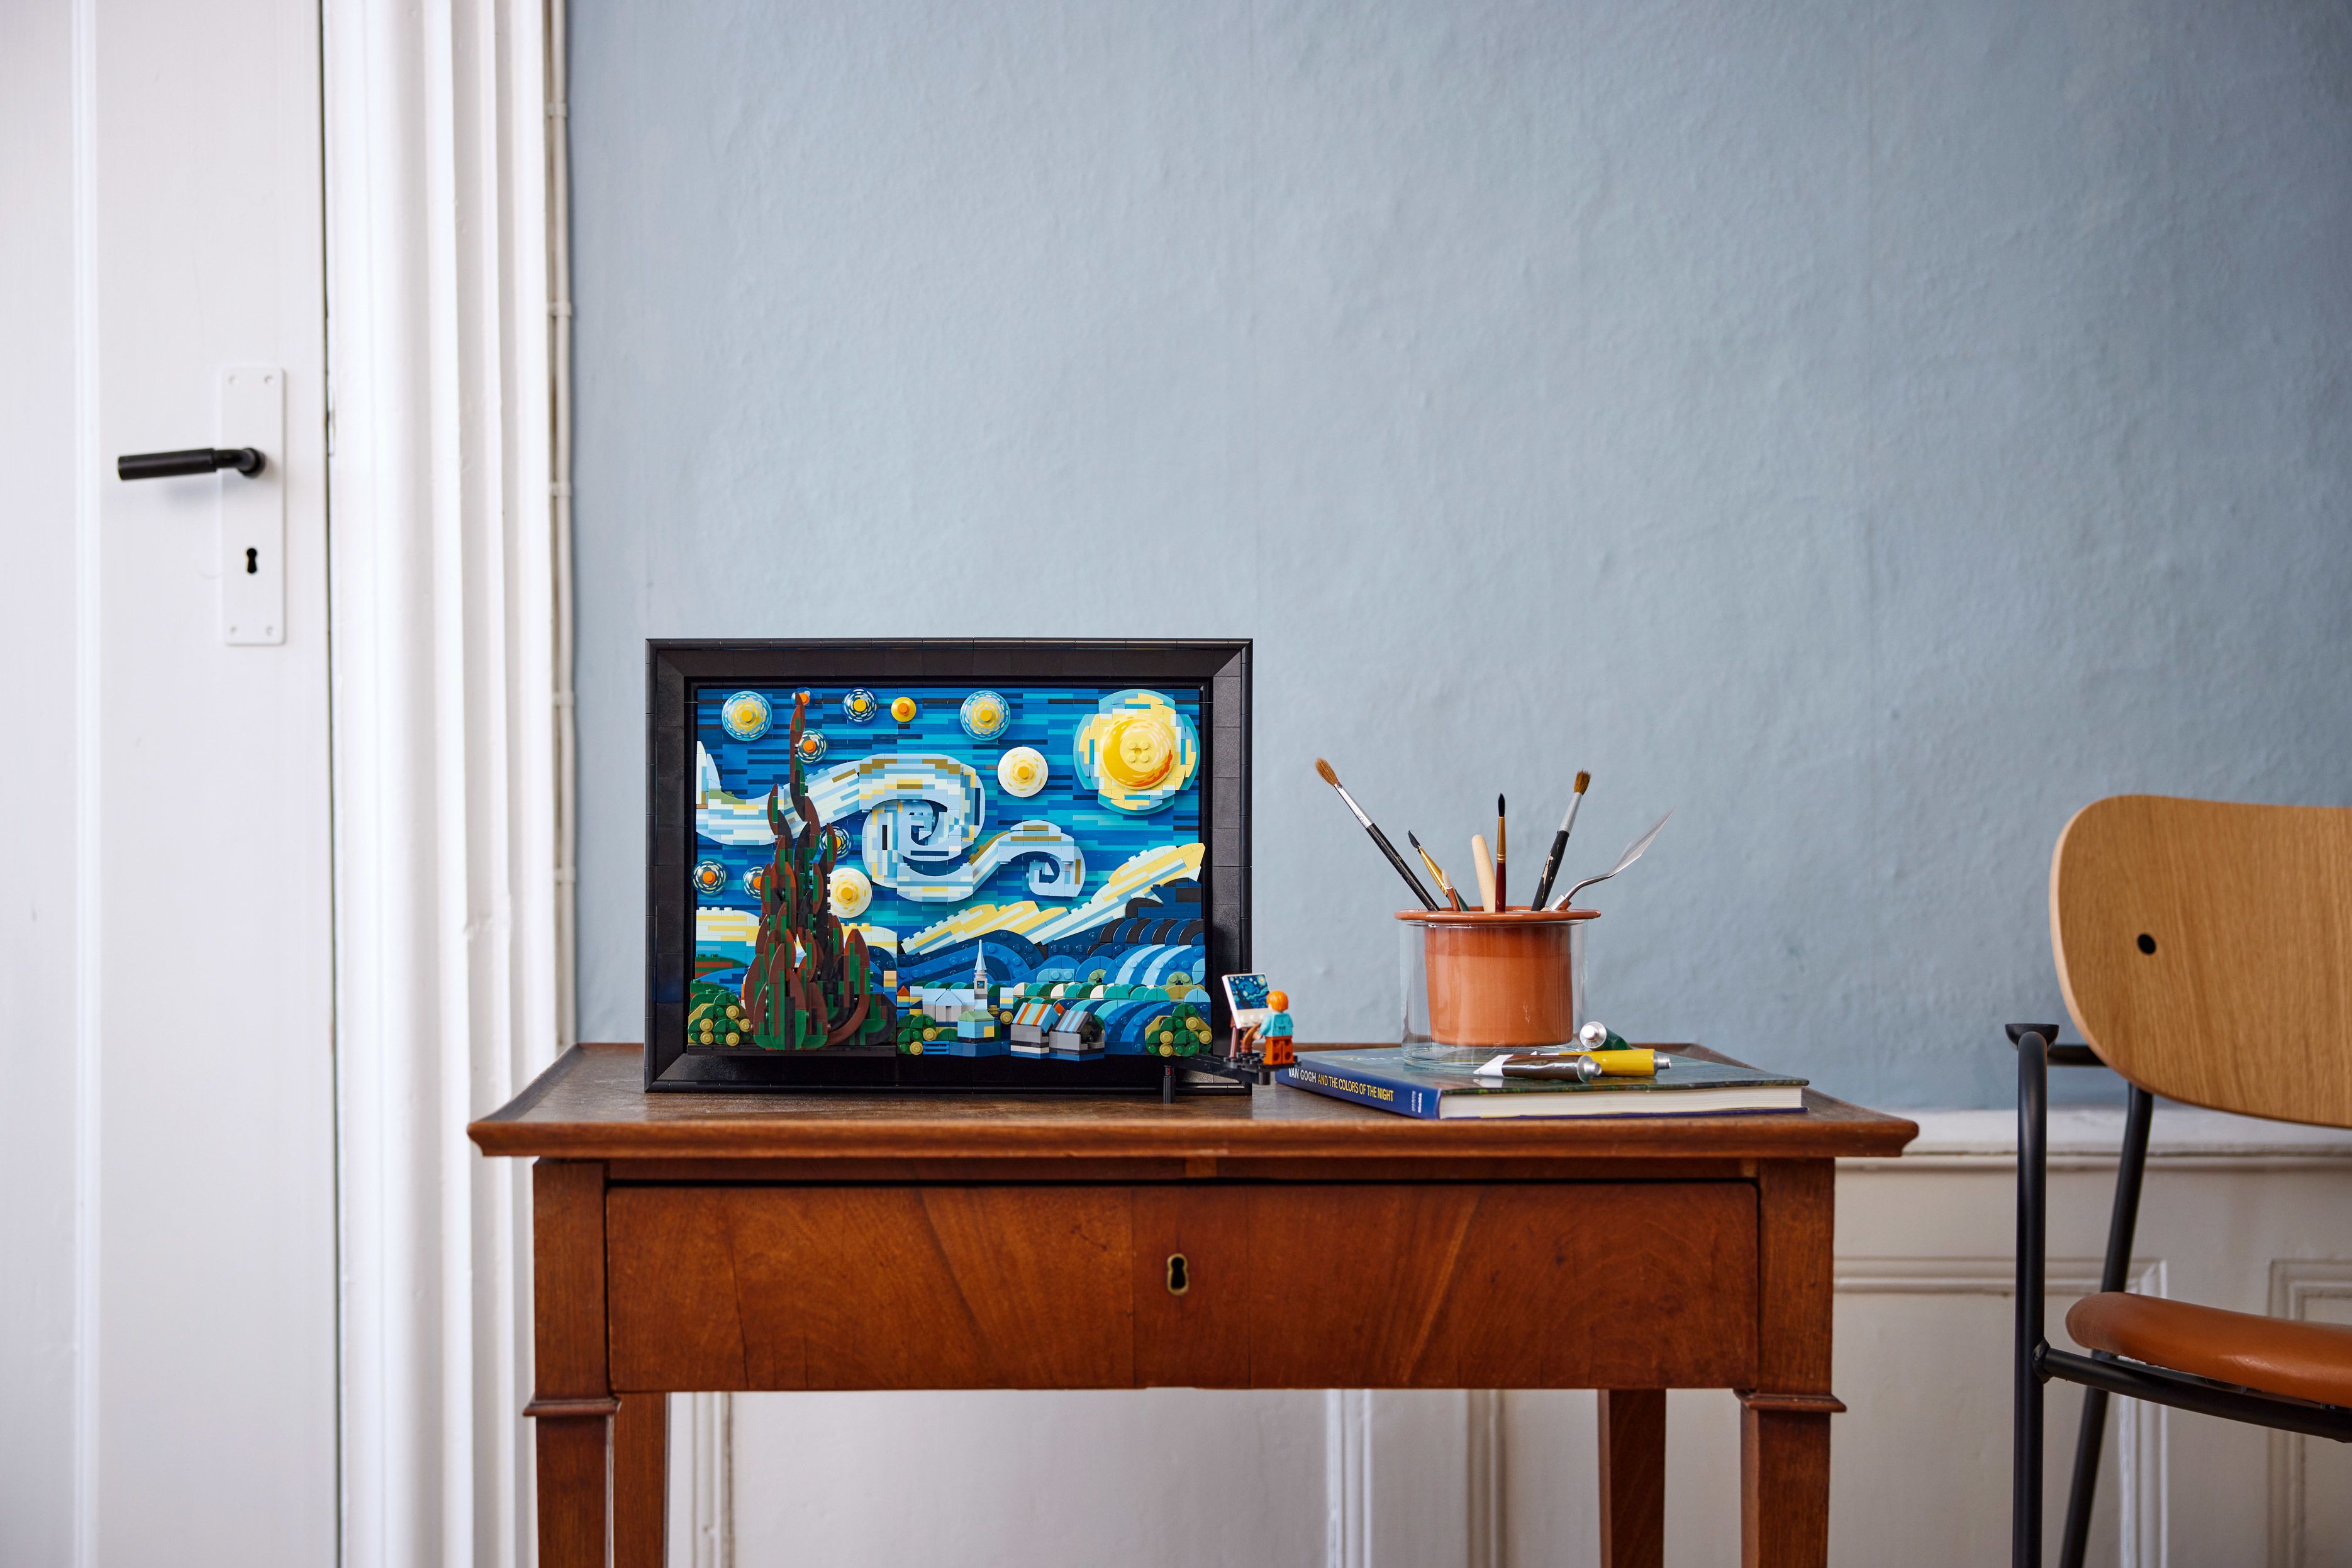 Vincent van Gogh's The Starry Night, but make it LEGO